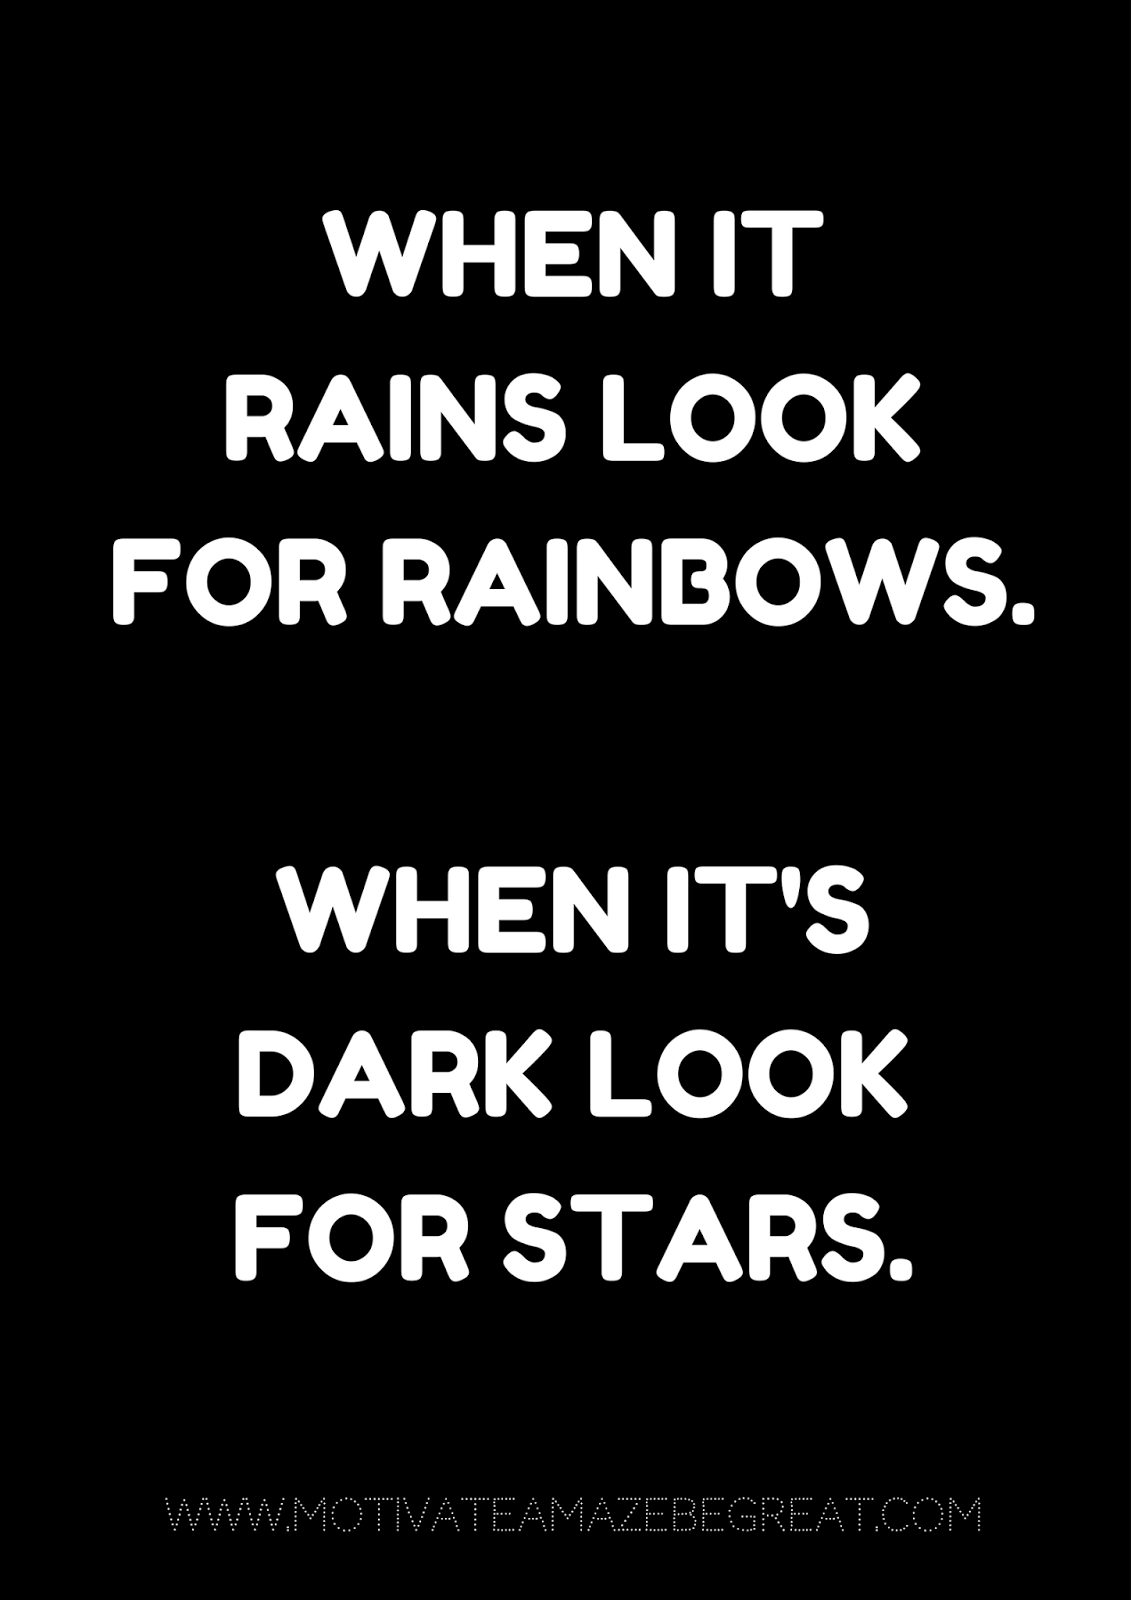 27 Self Motivation Quotes And Posters For Success "When it rains look for rainbows